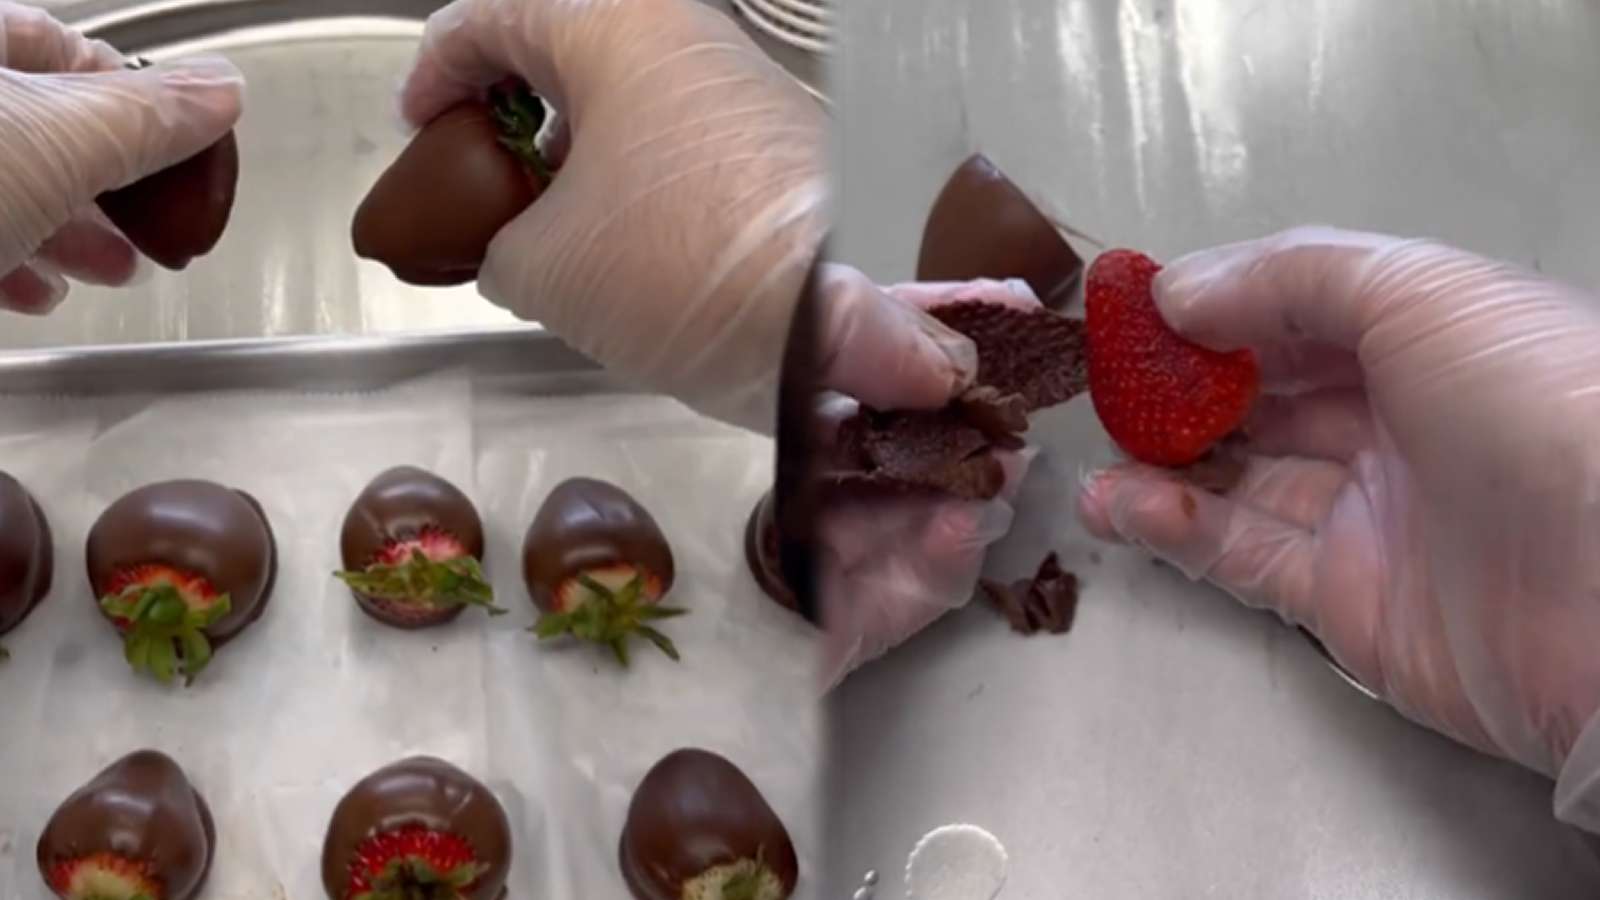 Internet baffled by bizarre order of chocolate-coated strawberries without the chocolate